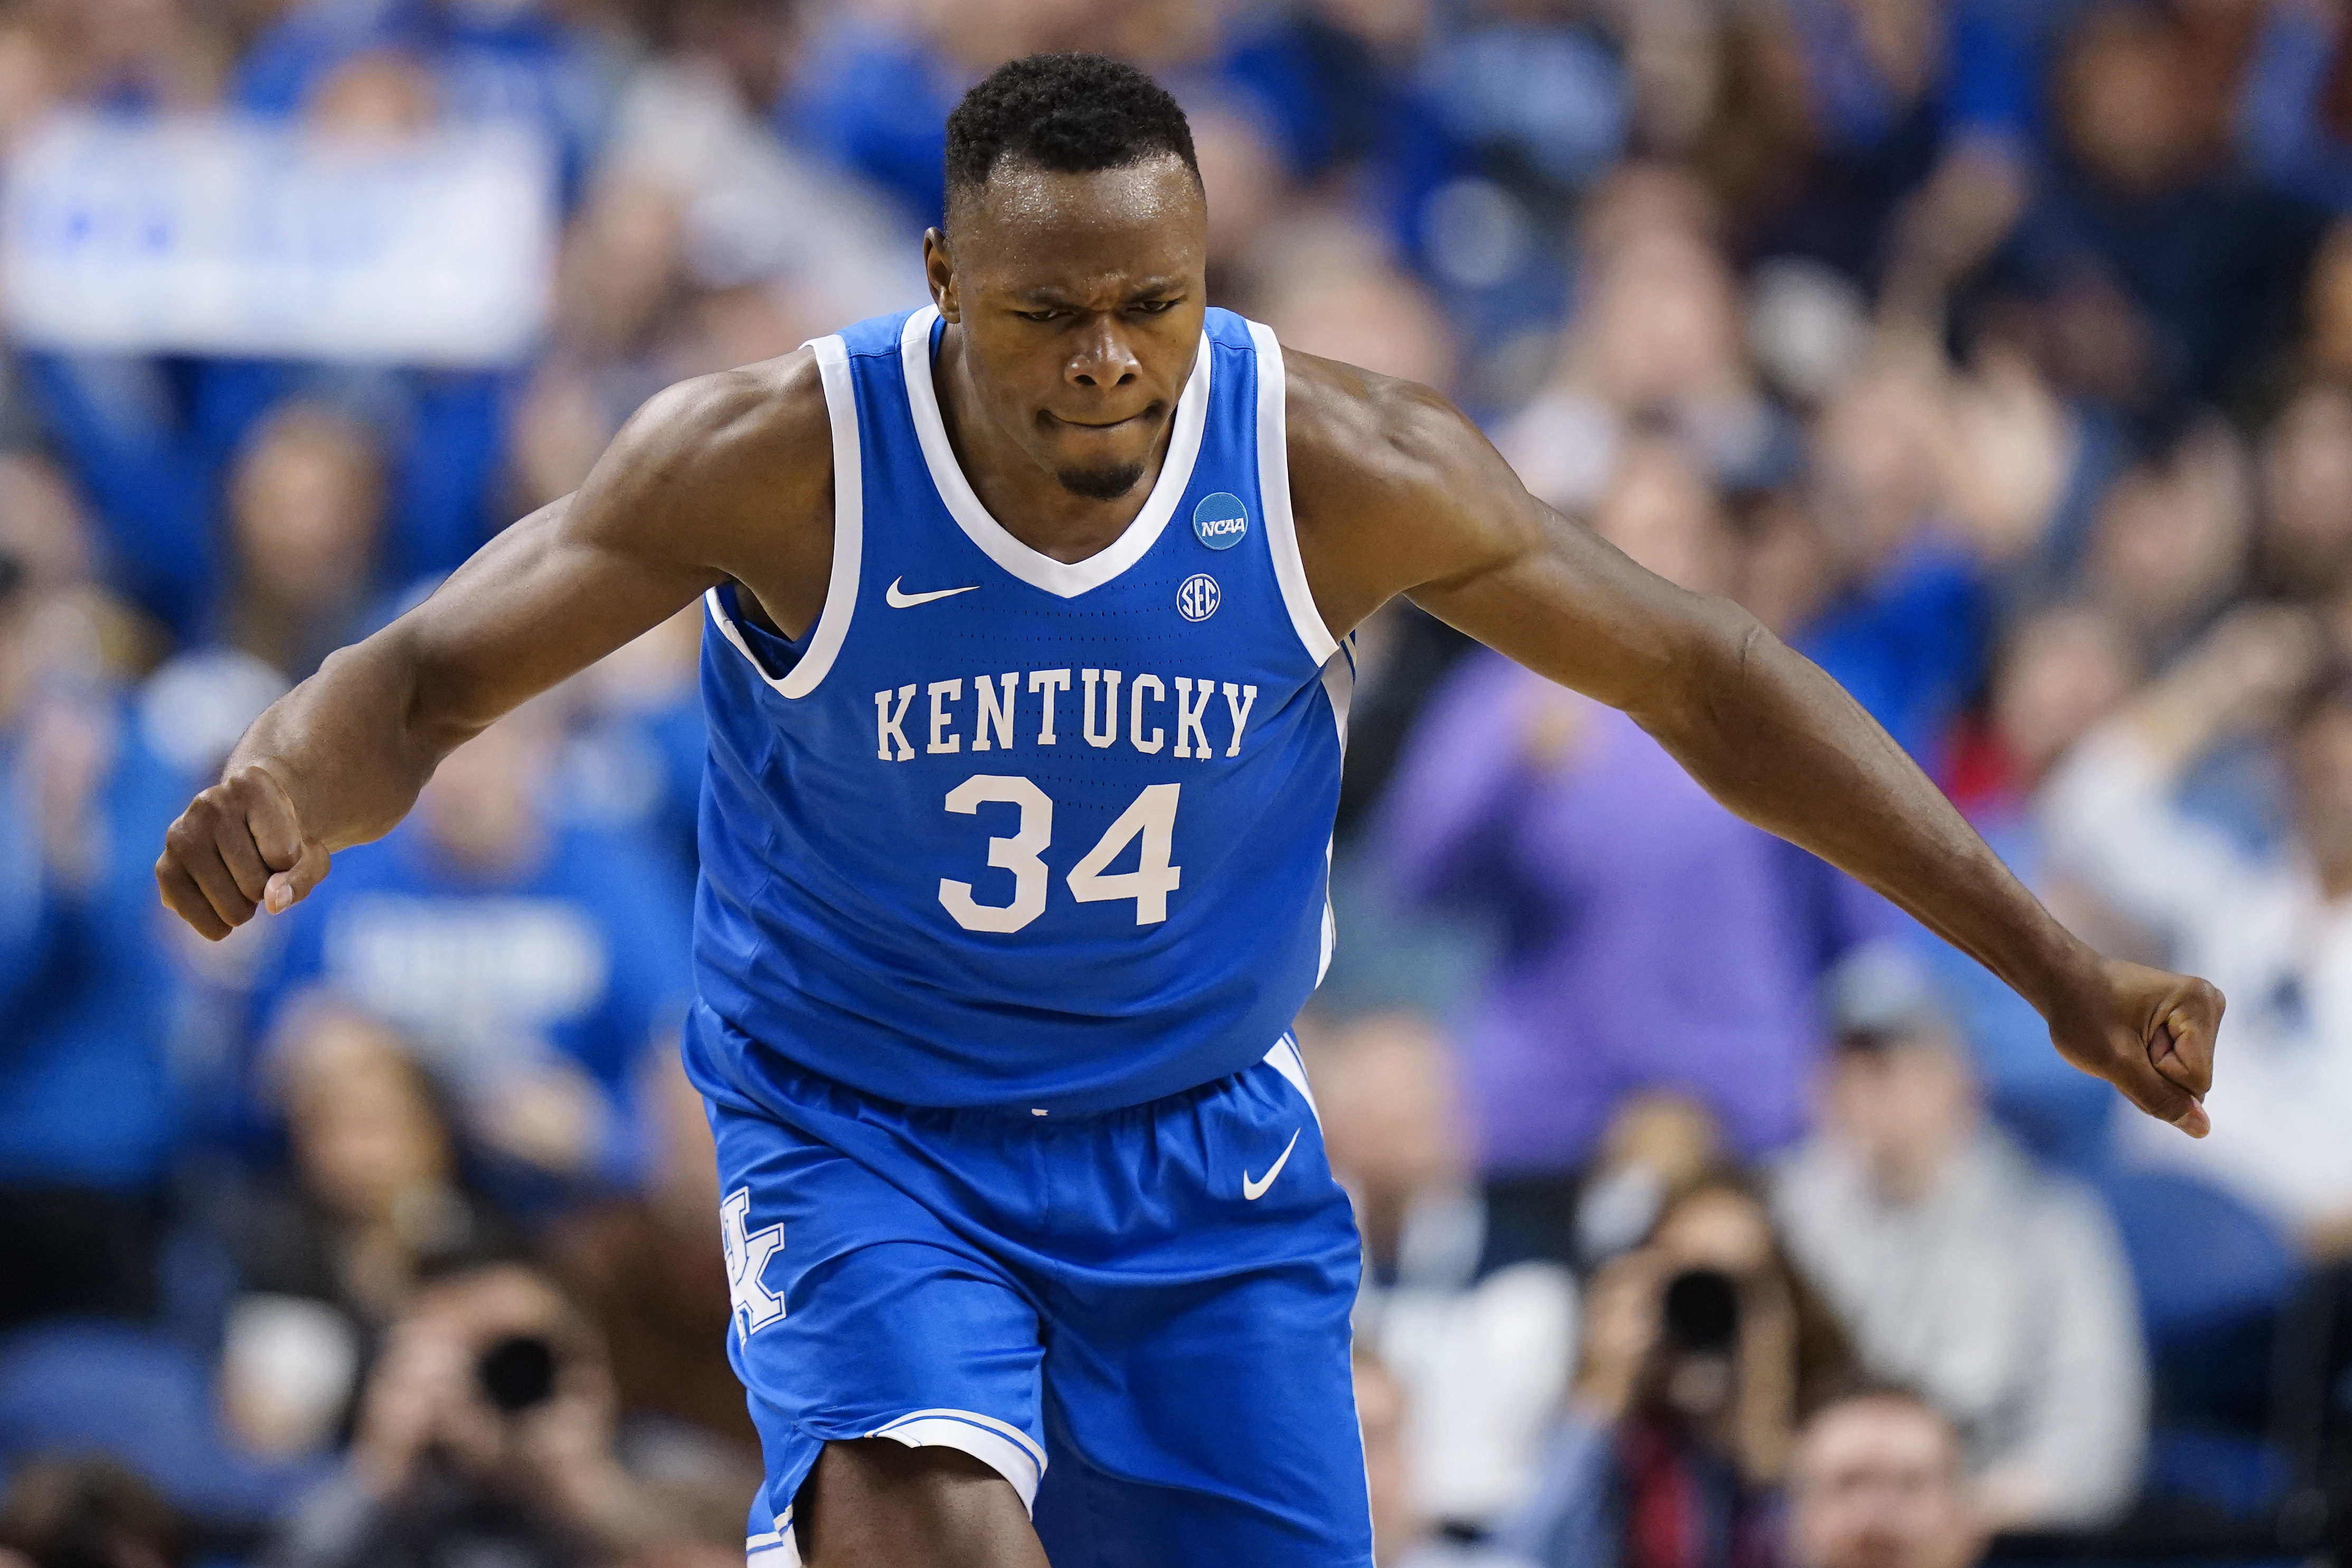 Oscar Tshiebwe #34 of the Kentucky Wildcats reacts during the first half against the Kansas State Wildcats in the second round of the NCAA Men’s Basketball Tournament at The Fieldhouse at Greensboro Coliseum on March 19, 2023 in Greensboro, North Carolina.